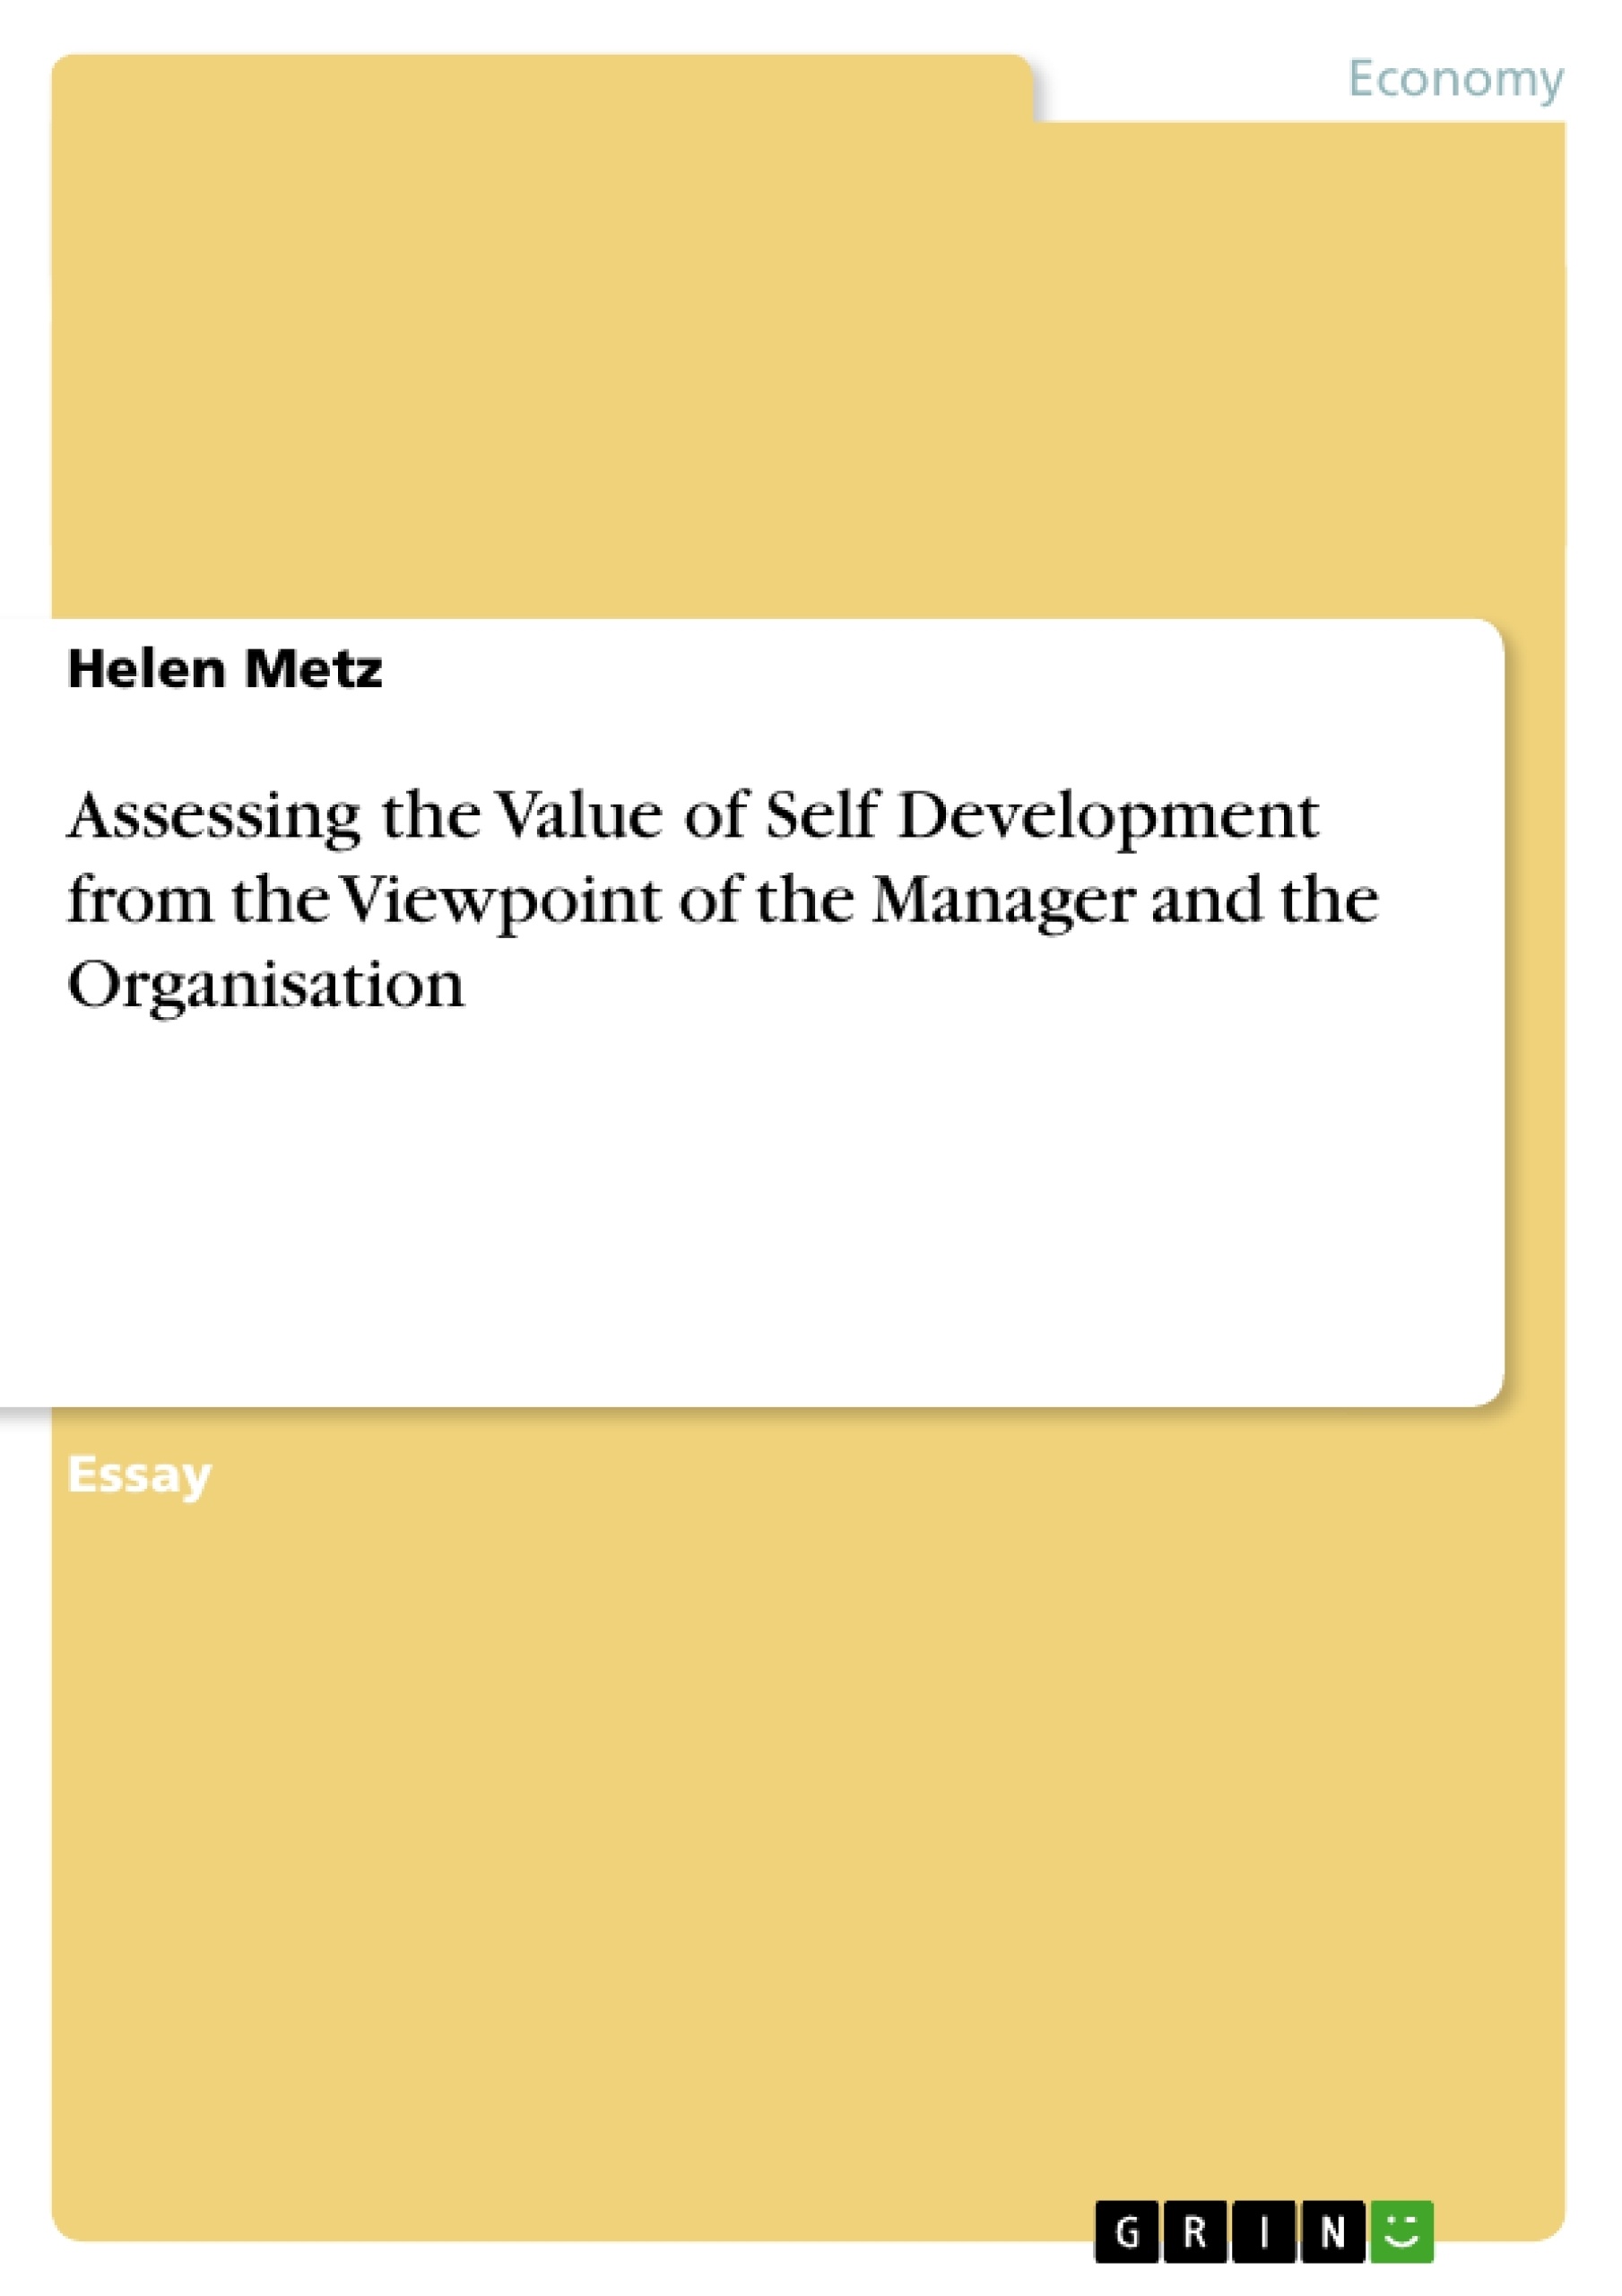 Title: Assessing the Value of Self Development from the Viewpoint of the Manager and the Organisation